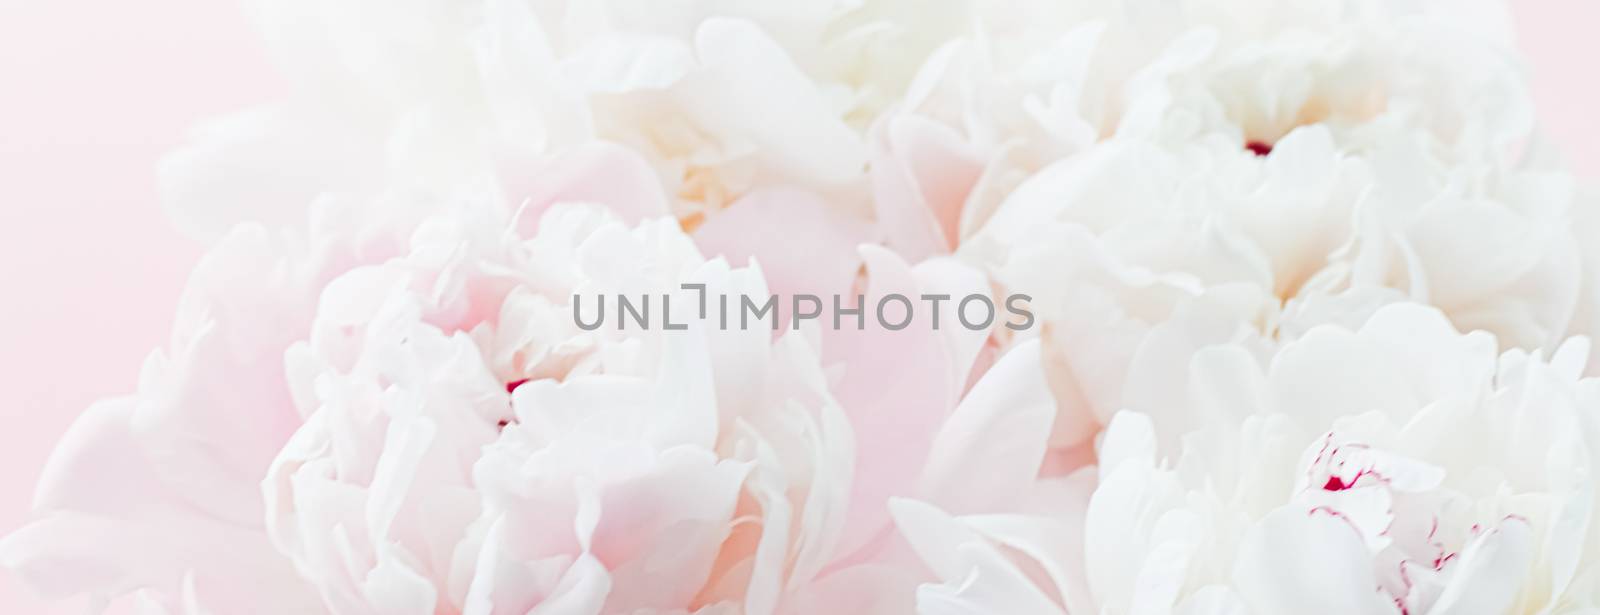 White peony flowers as floral art on pink background, wedding flatlay and luxury branding design